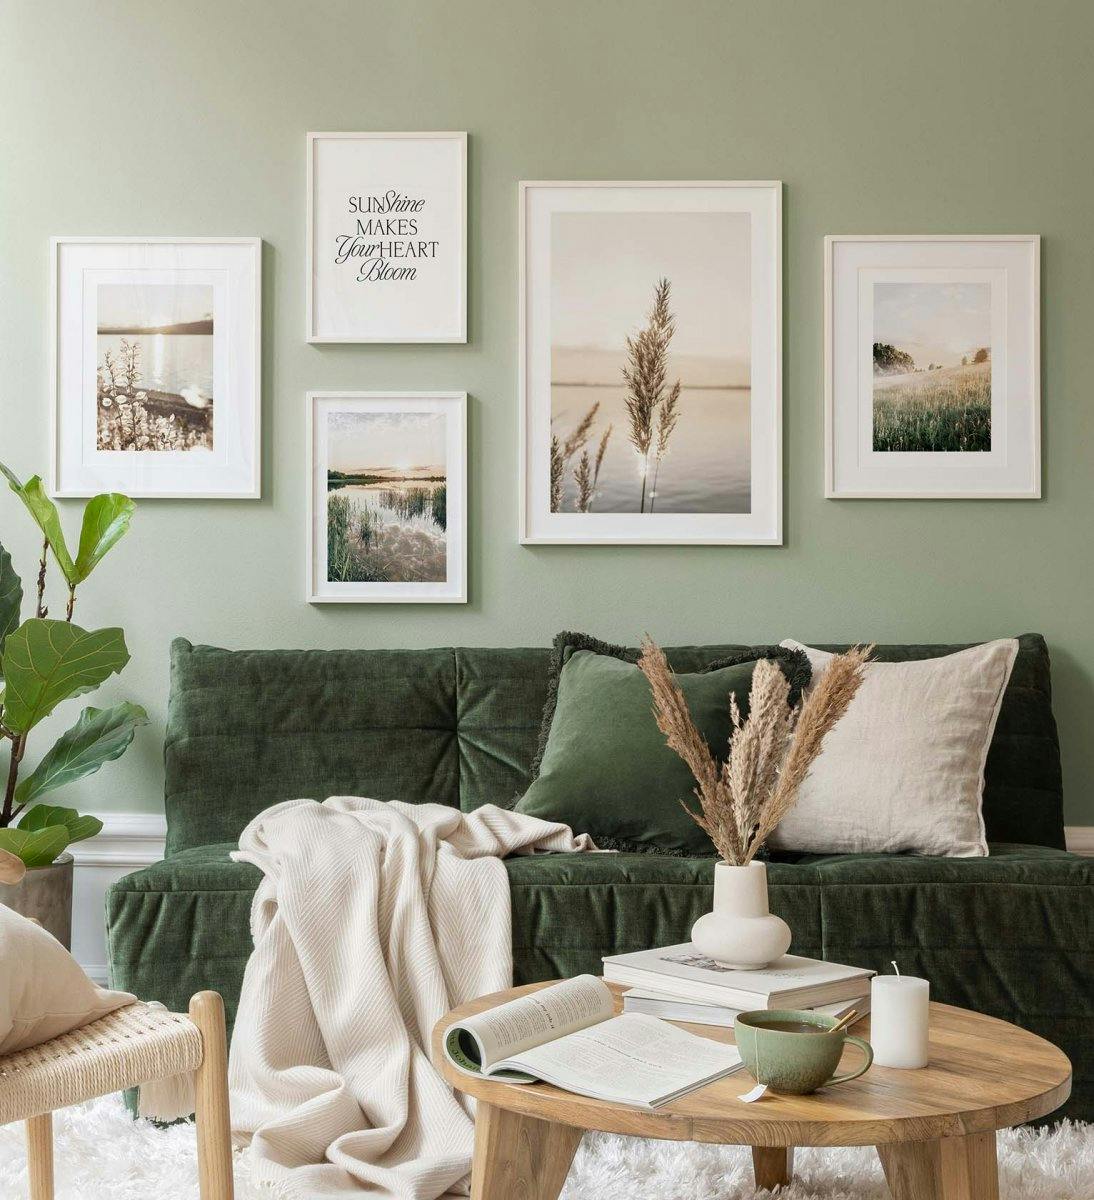 Landscape photography in a green theme creates a serene feel in the living room